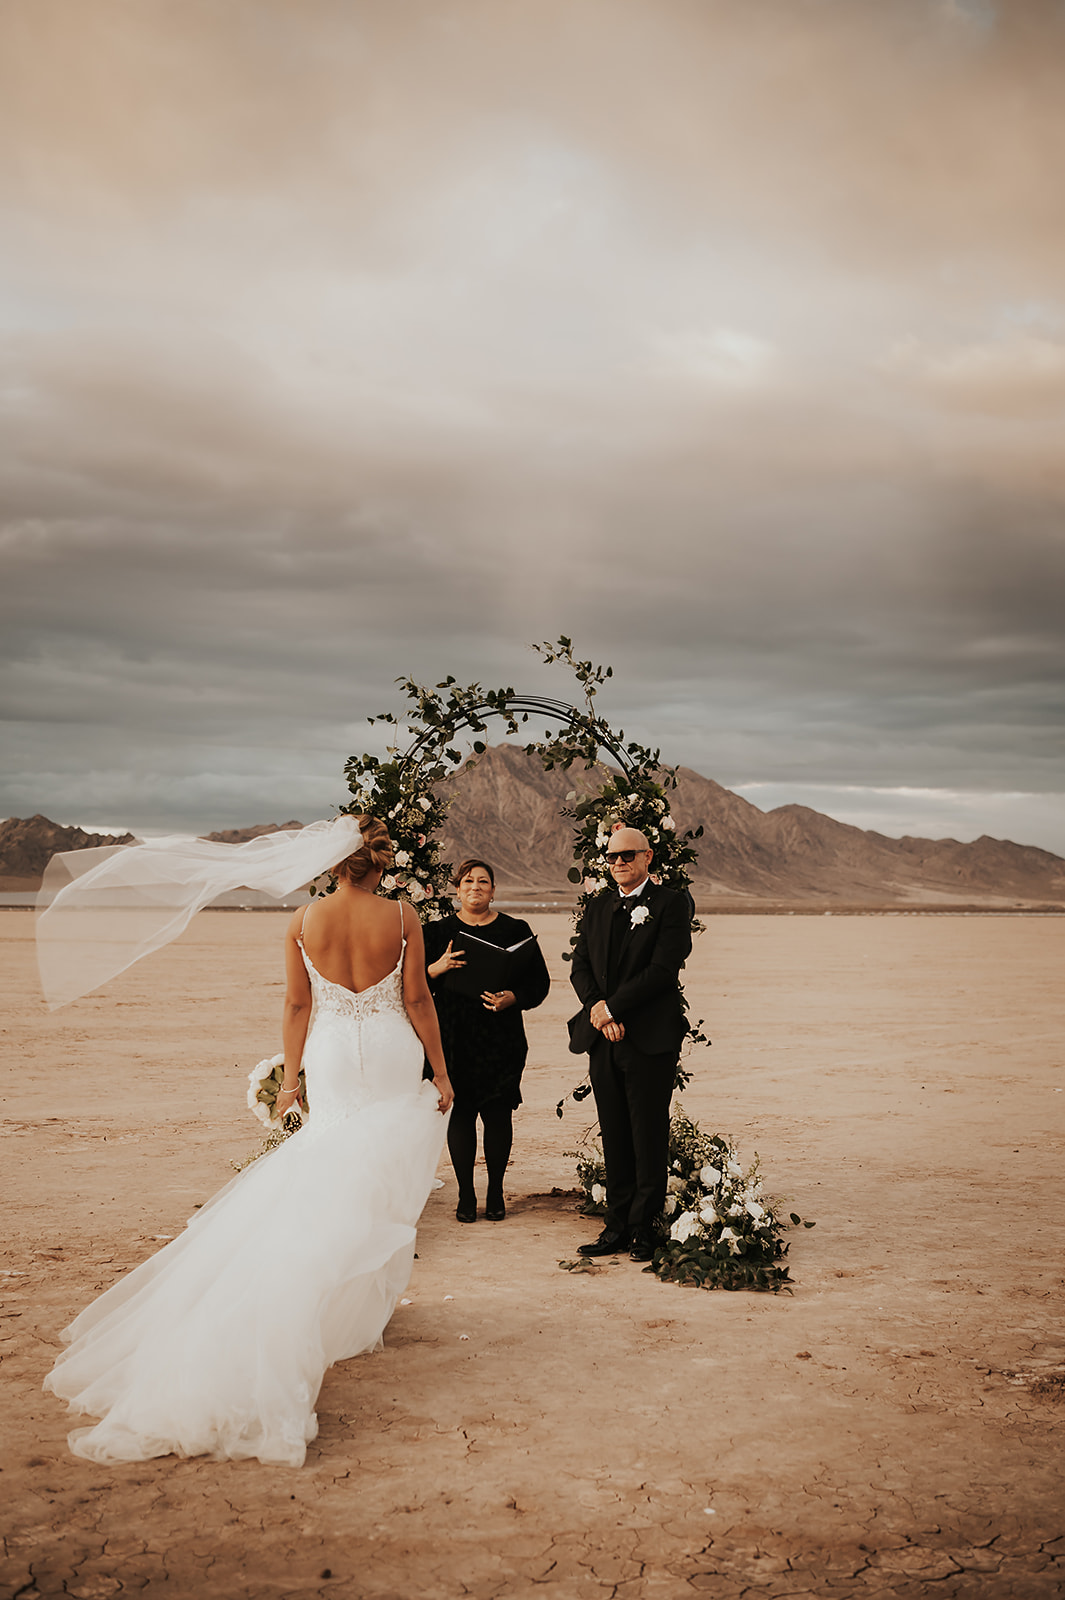 Dry Lake Bed Wedding & Elopement Guide. Bride walking towards the wedding arch with groom and officiant smiling at her.